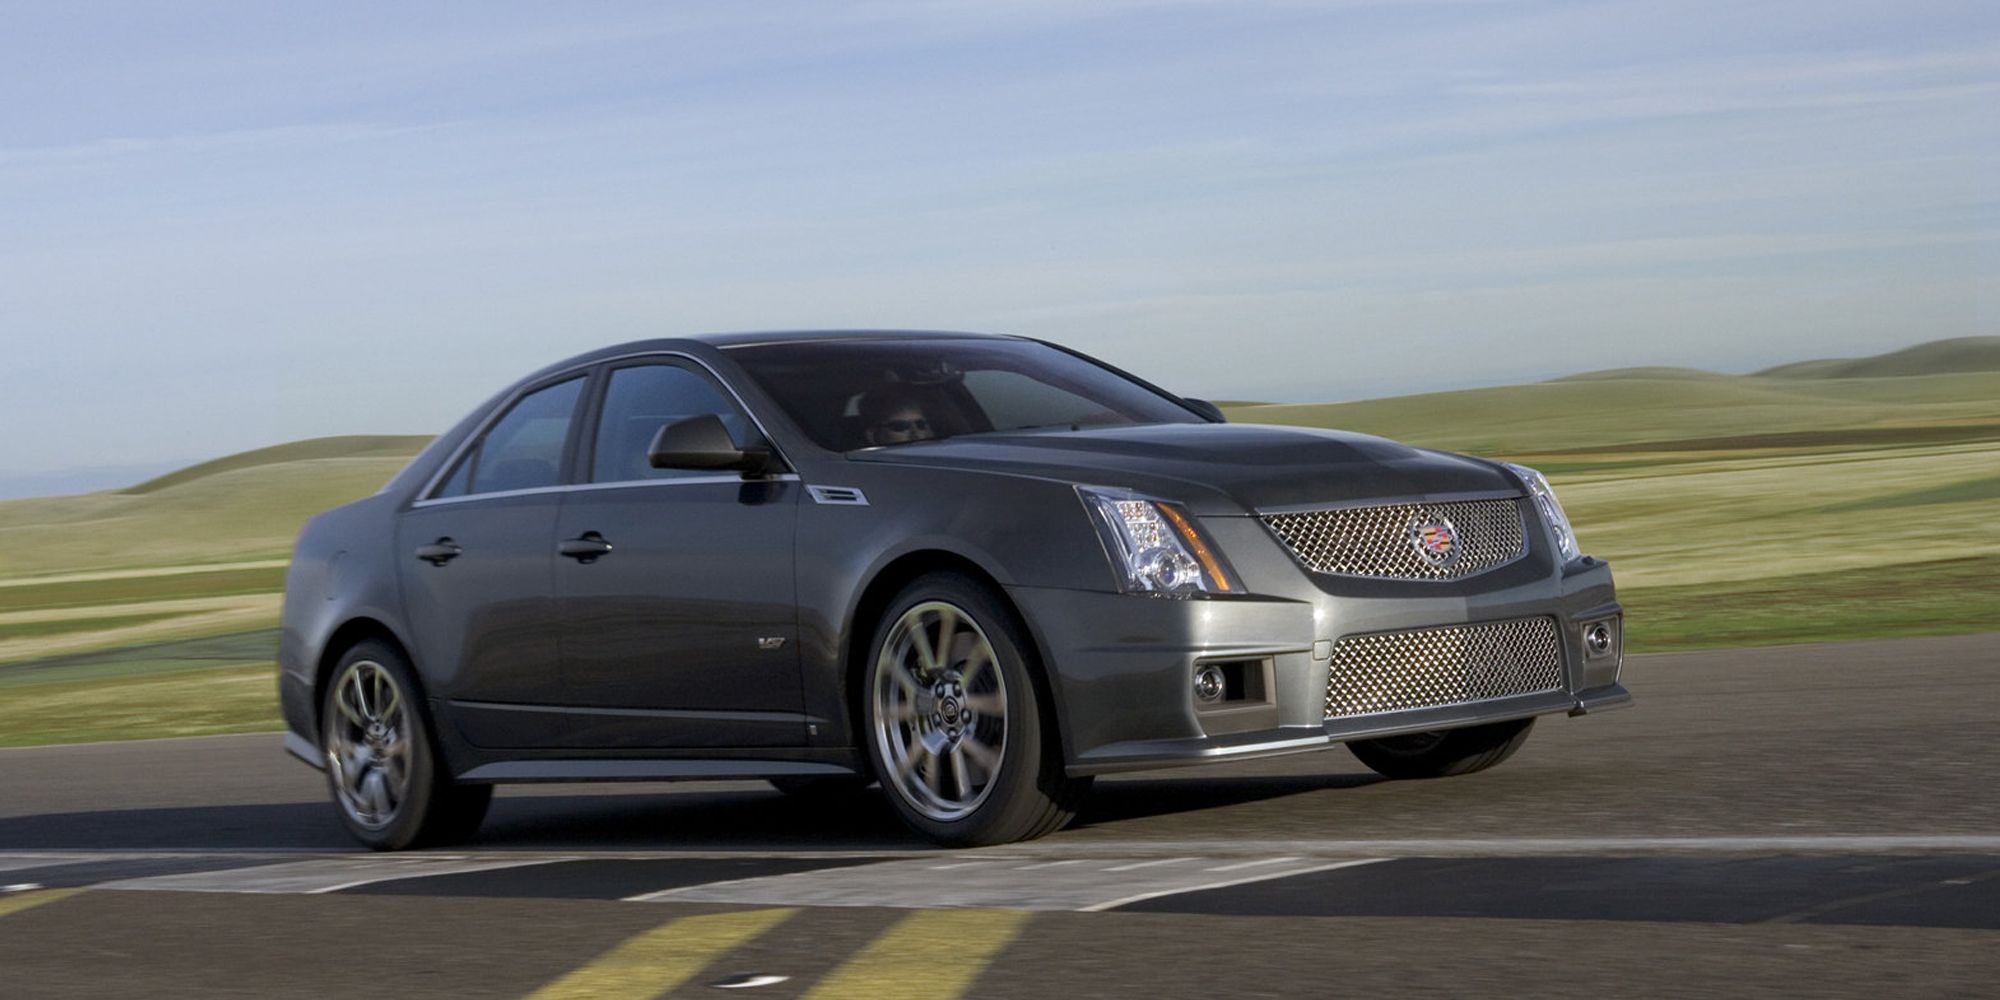 Front 3/4 view of a gray CTS-V sedan speeding on an airfield, right side